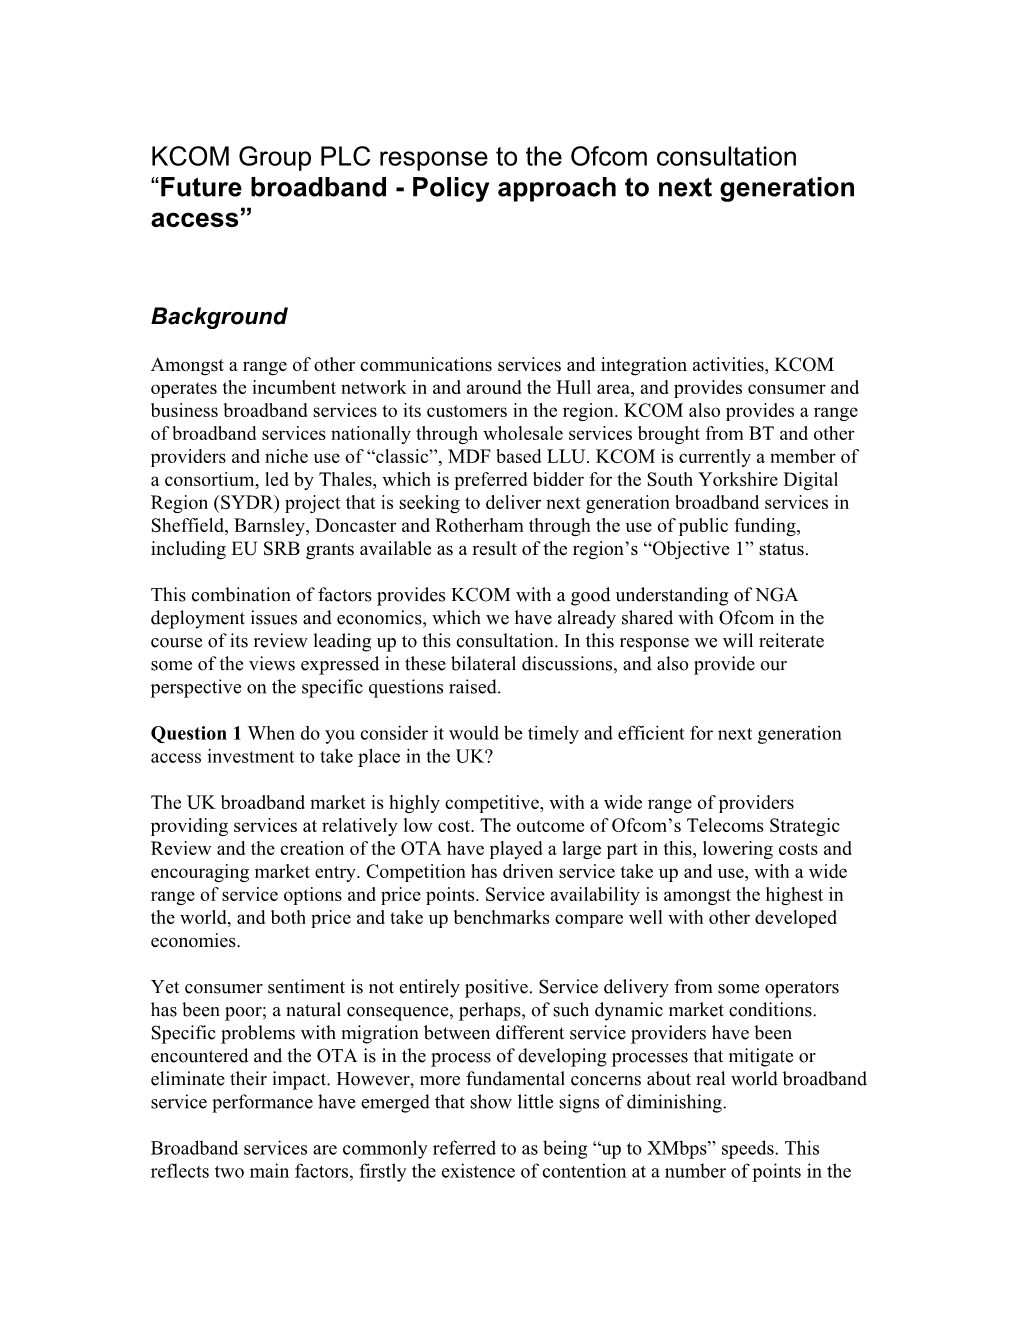 KCOM Group PLC Response to the Ofcom Consultation “Future Broadband - Policy Approach to Next Generation Access”